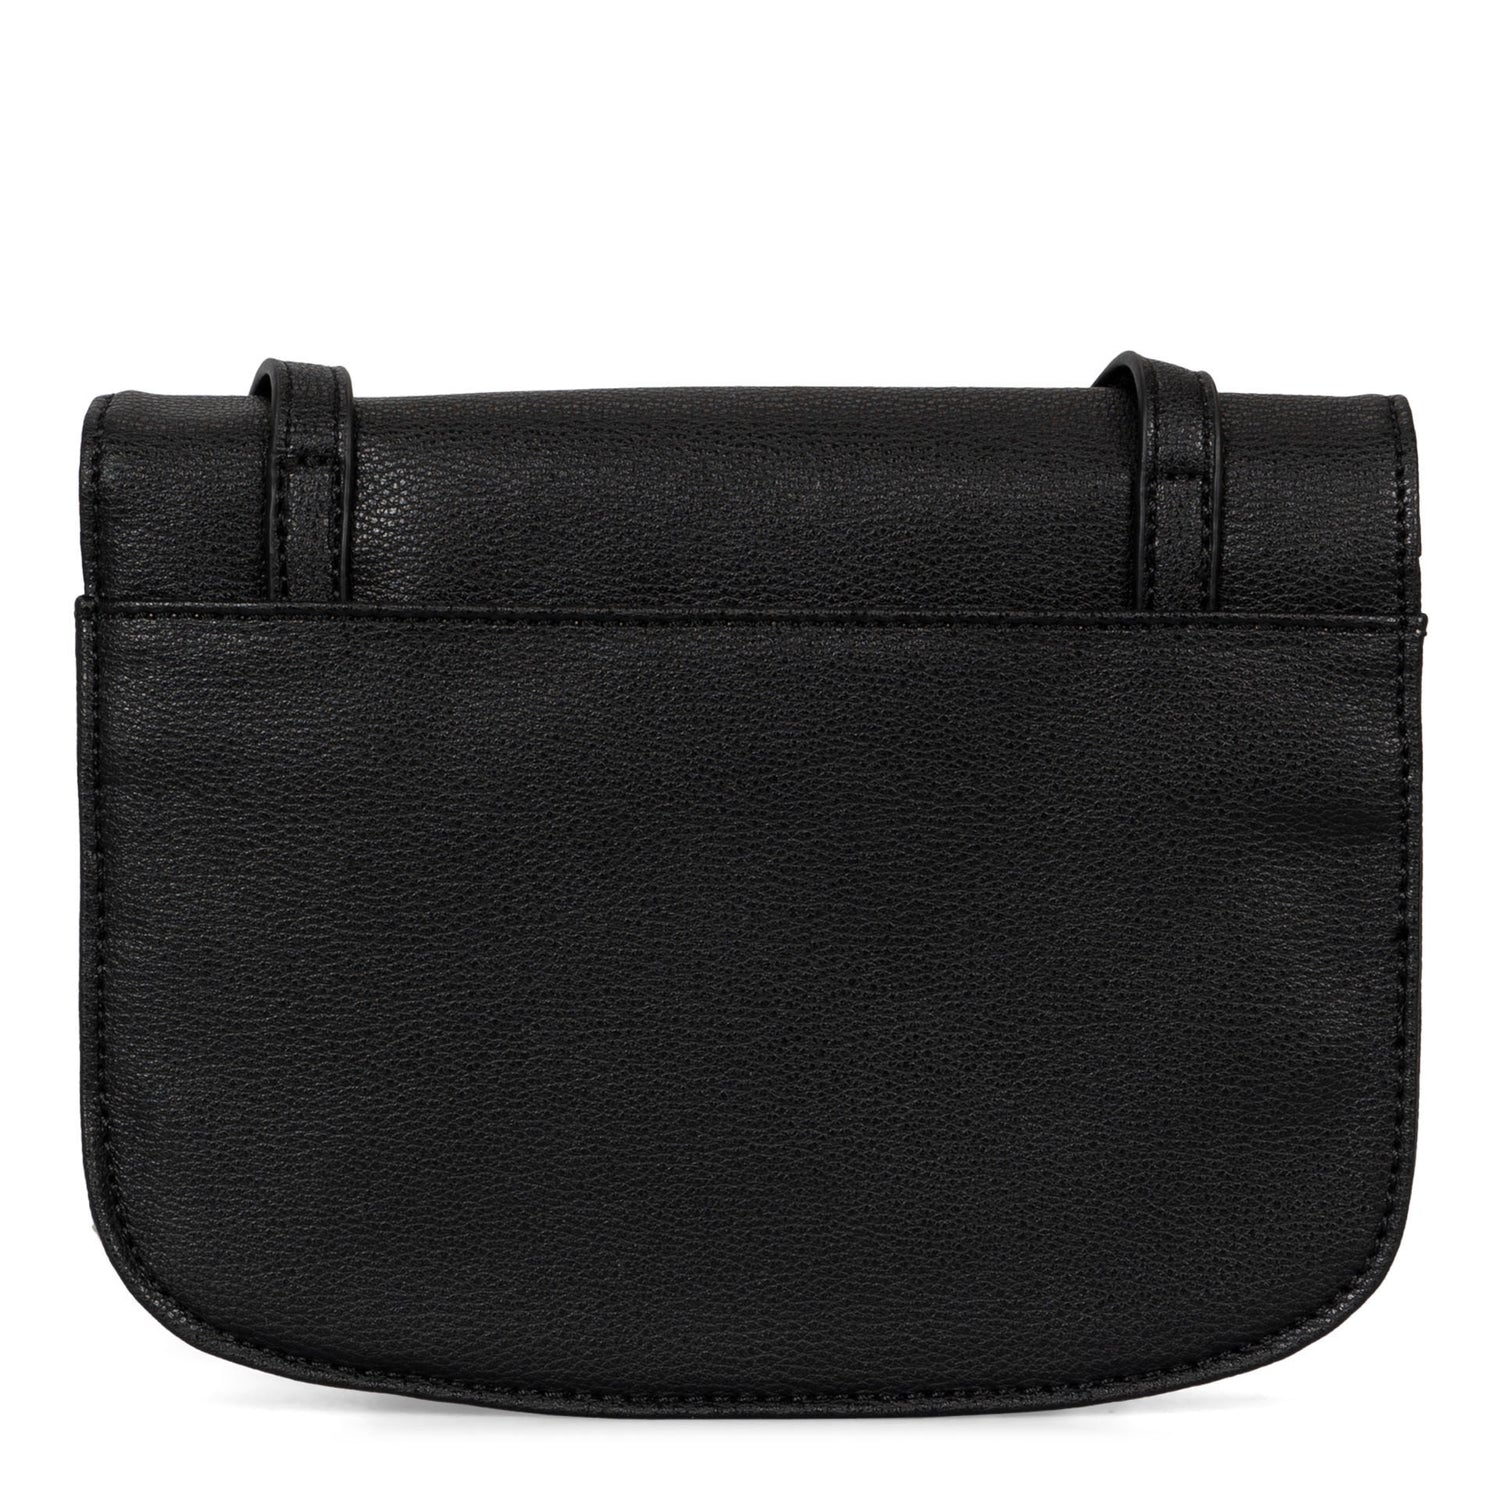 Backside of a black crossbody bag for women called Organizers on a white background, showcasing its interior and smooth texture - bentley